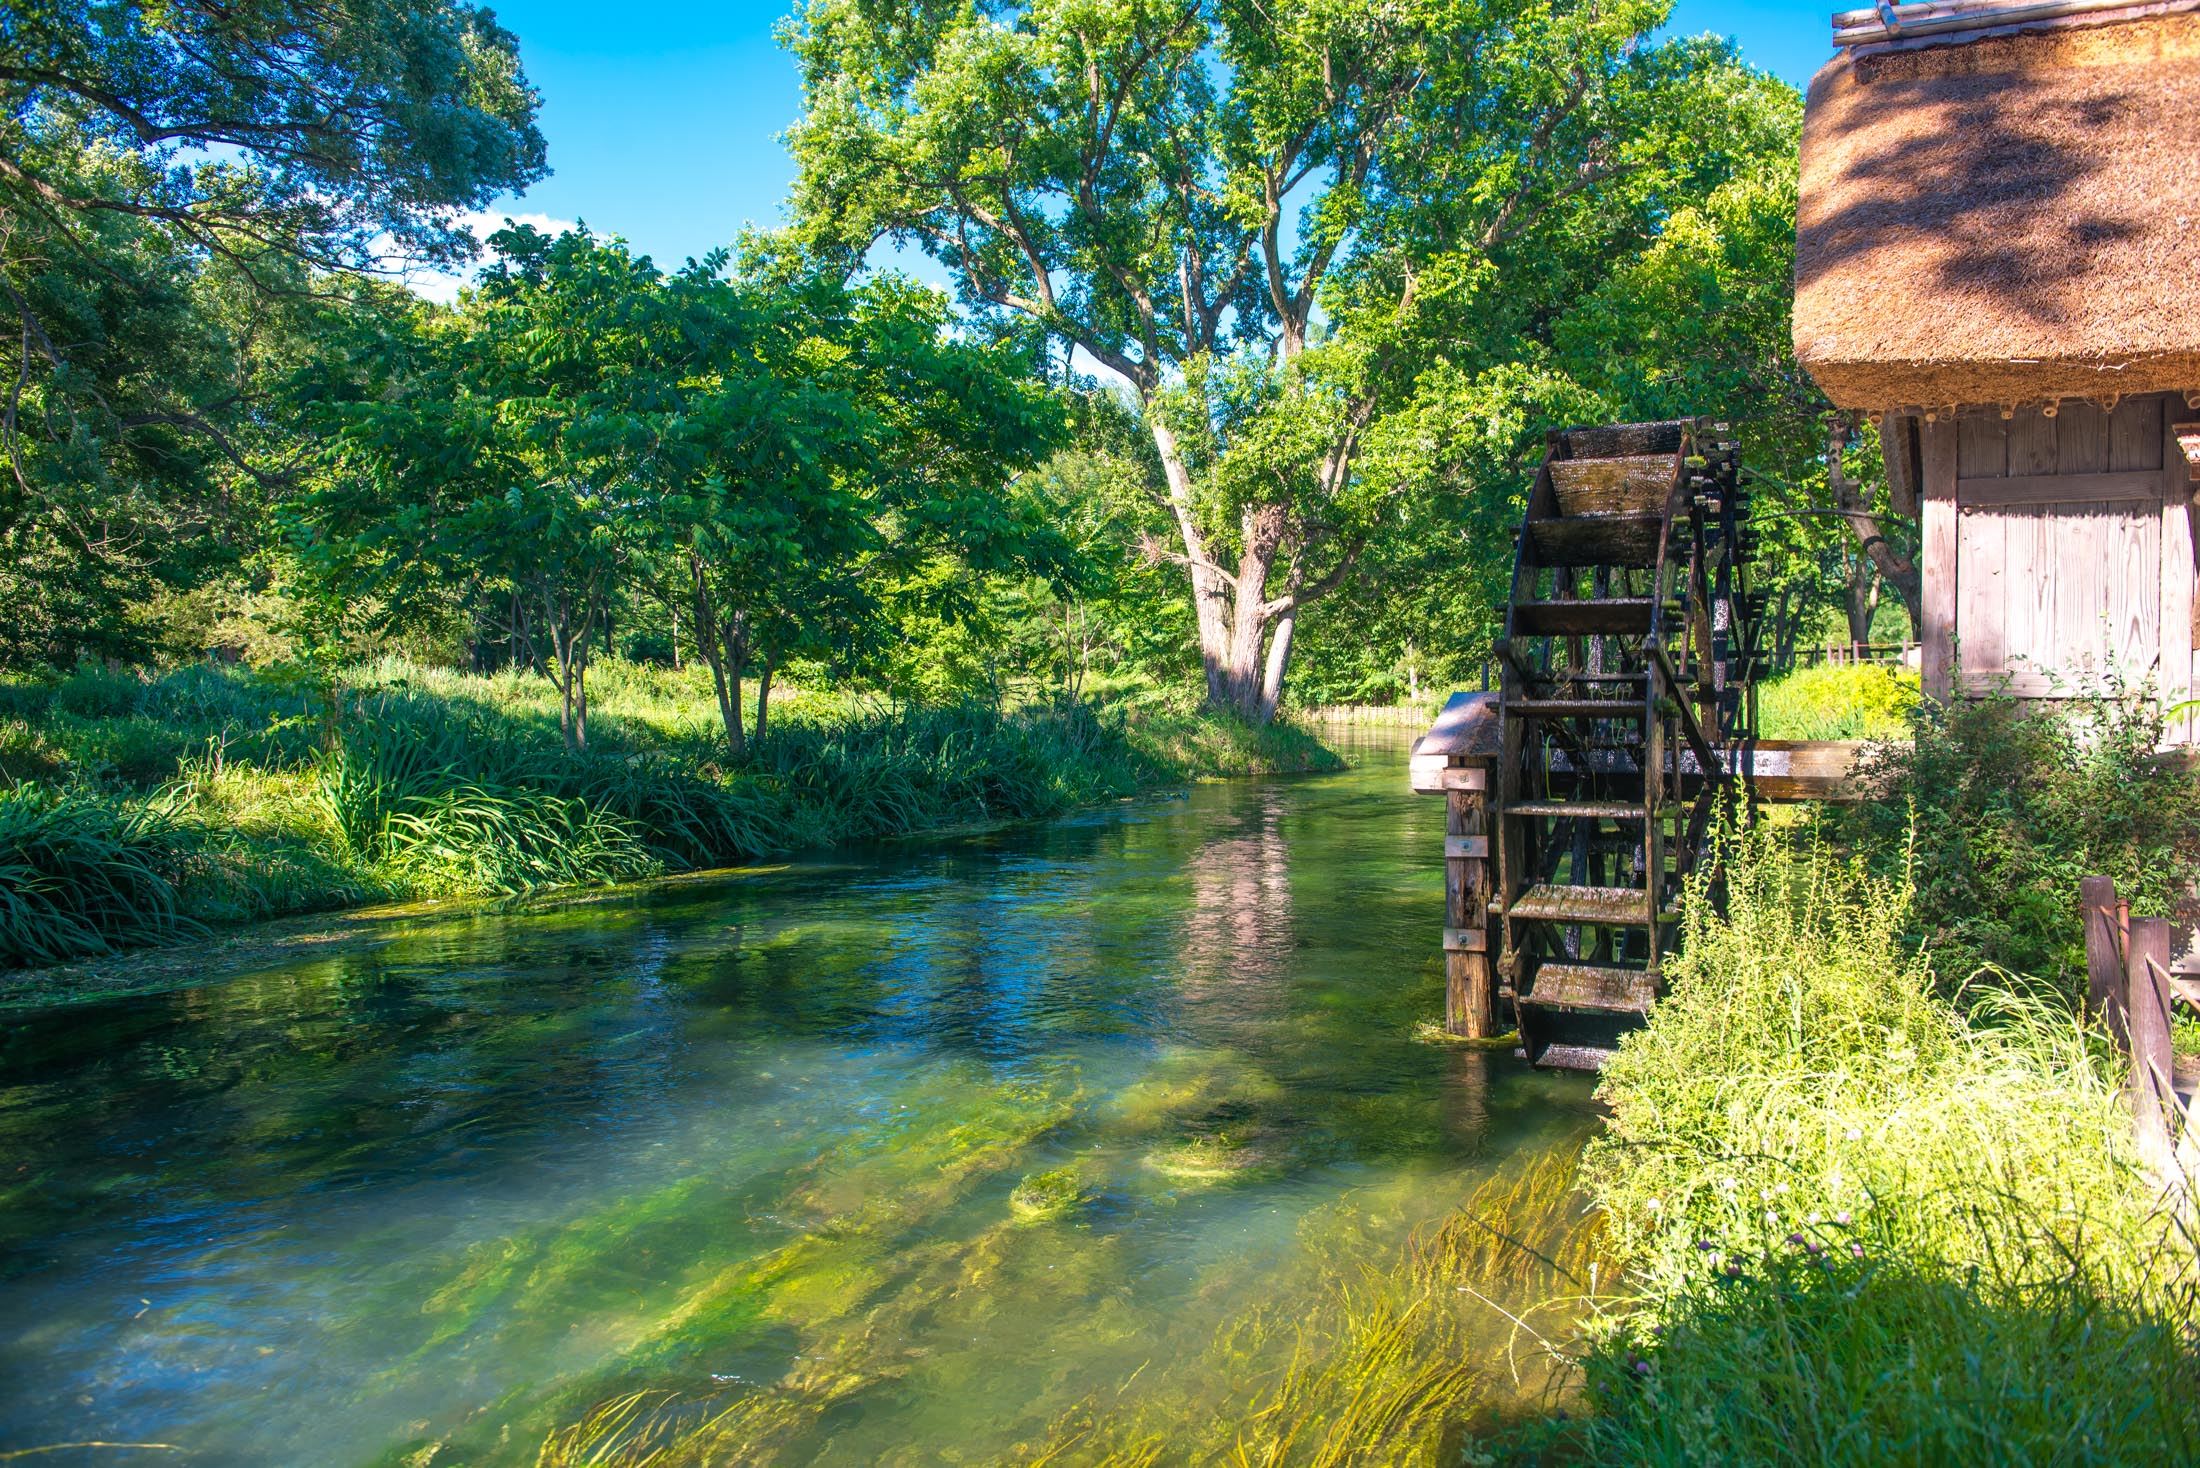 Tranquil watermill in lush Japanese wasabi farm, reflecting in clear stream.